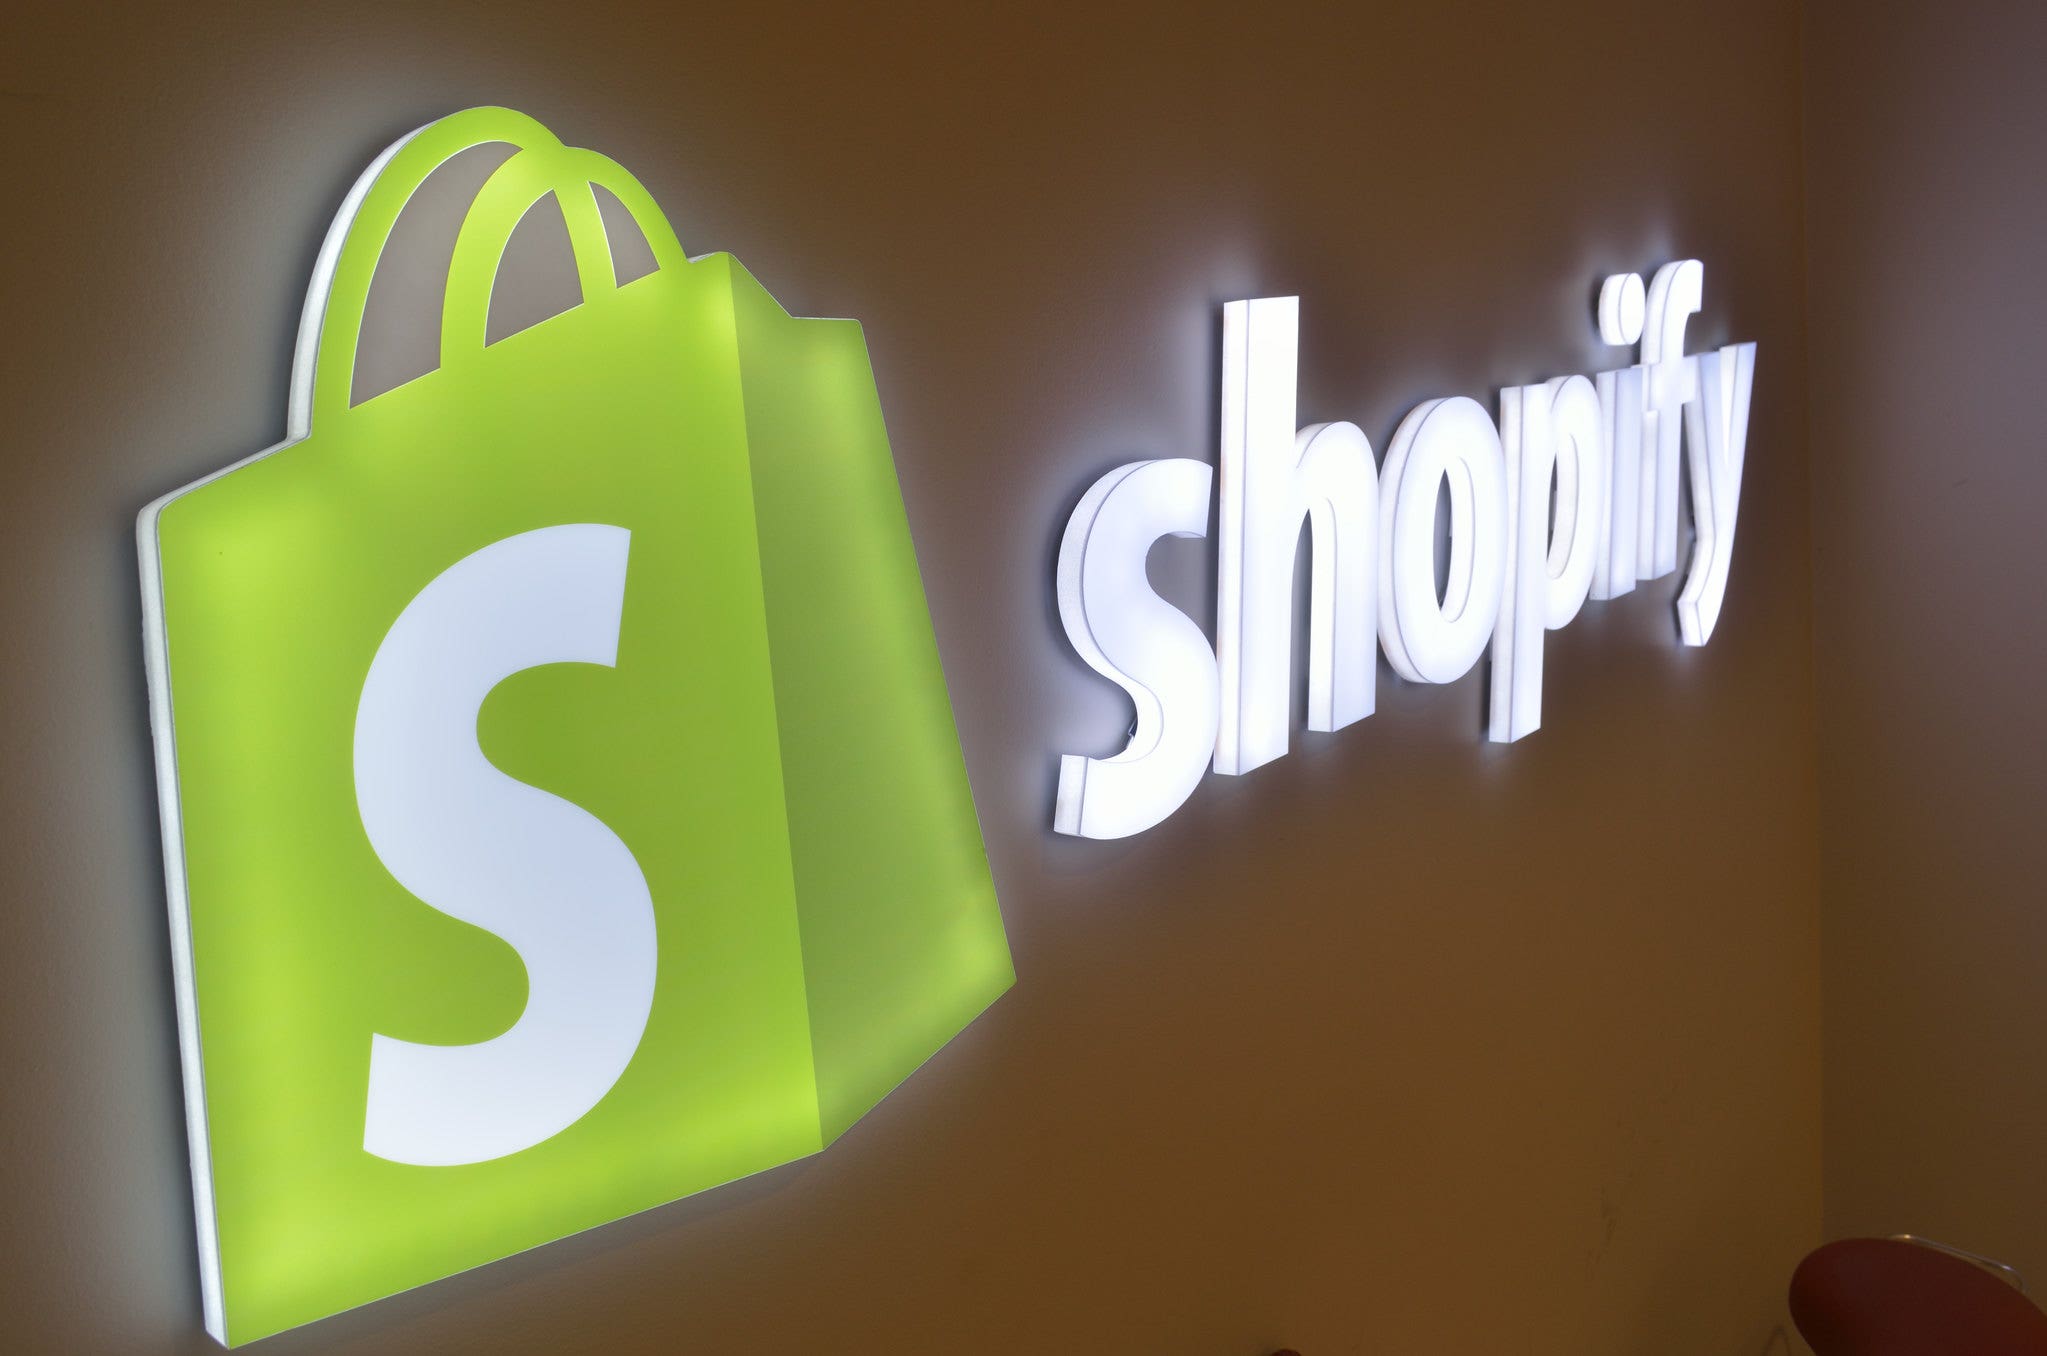 Why Shopify Shares Are Surging Today